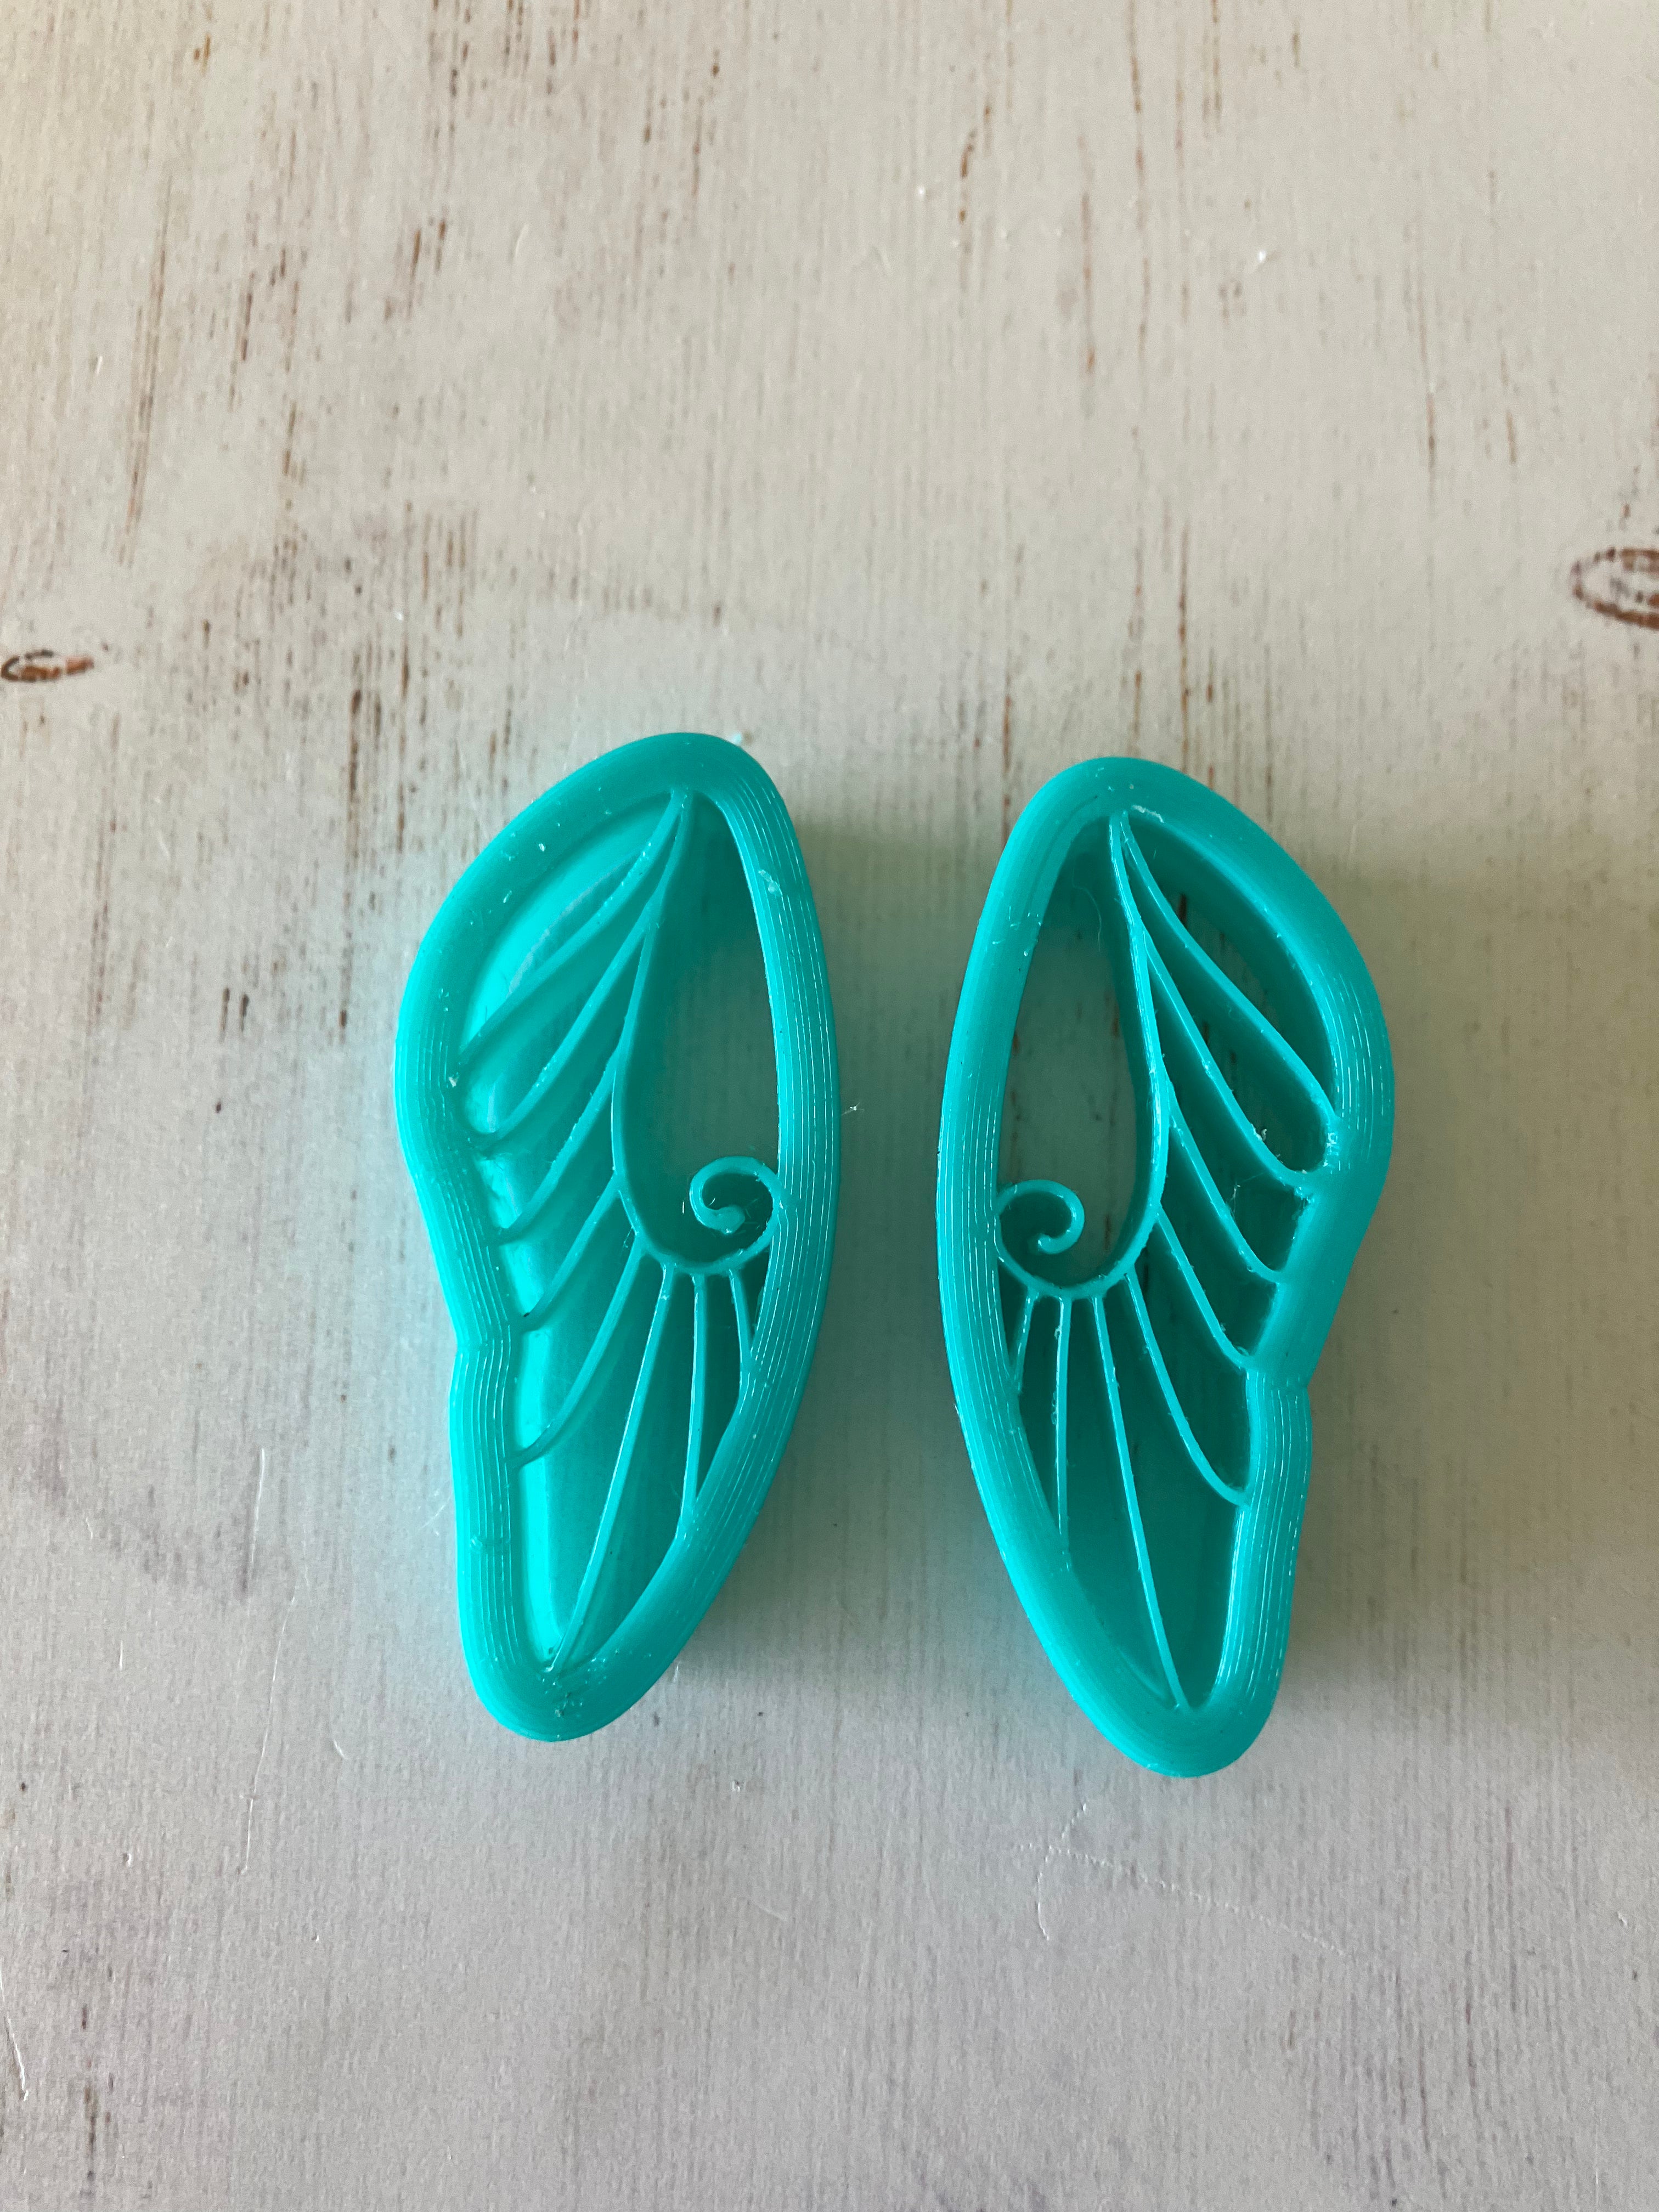 3D Gizmo's - Wings (Left and Right)